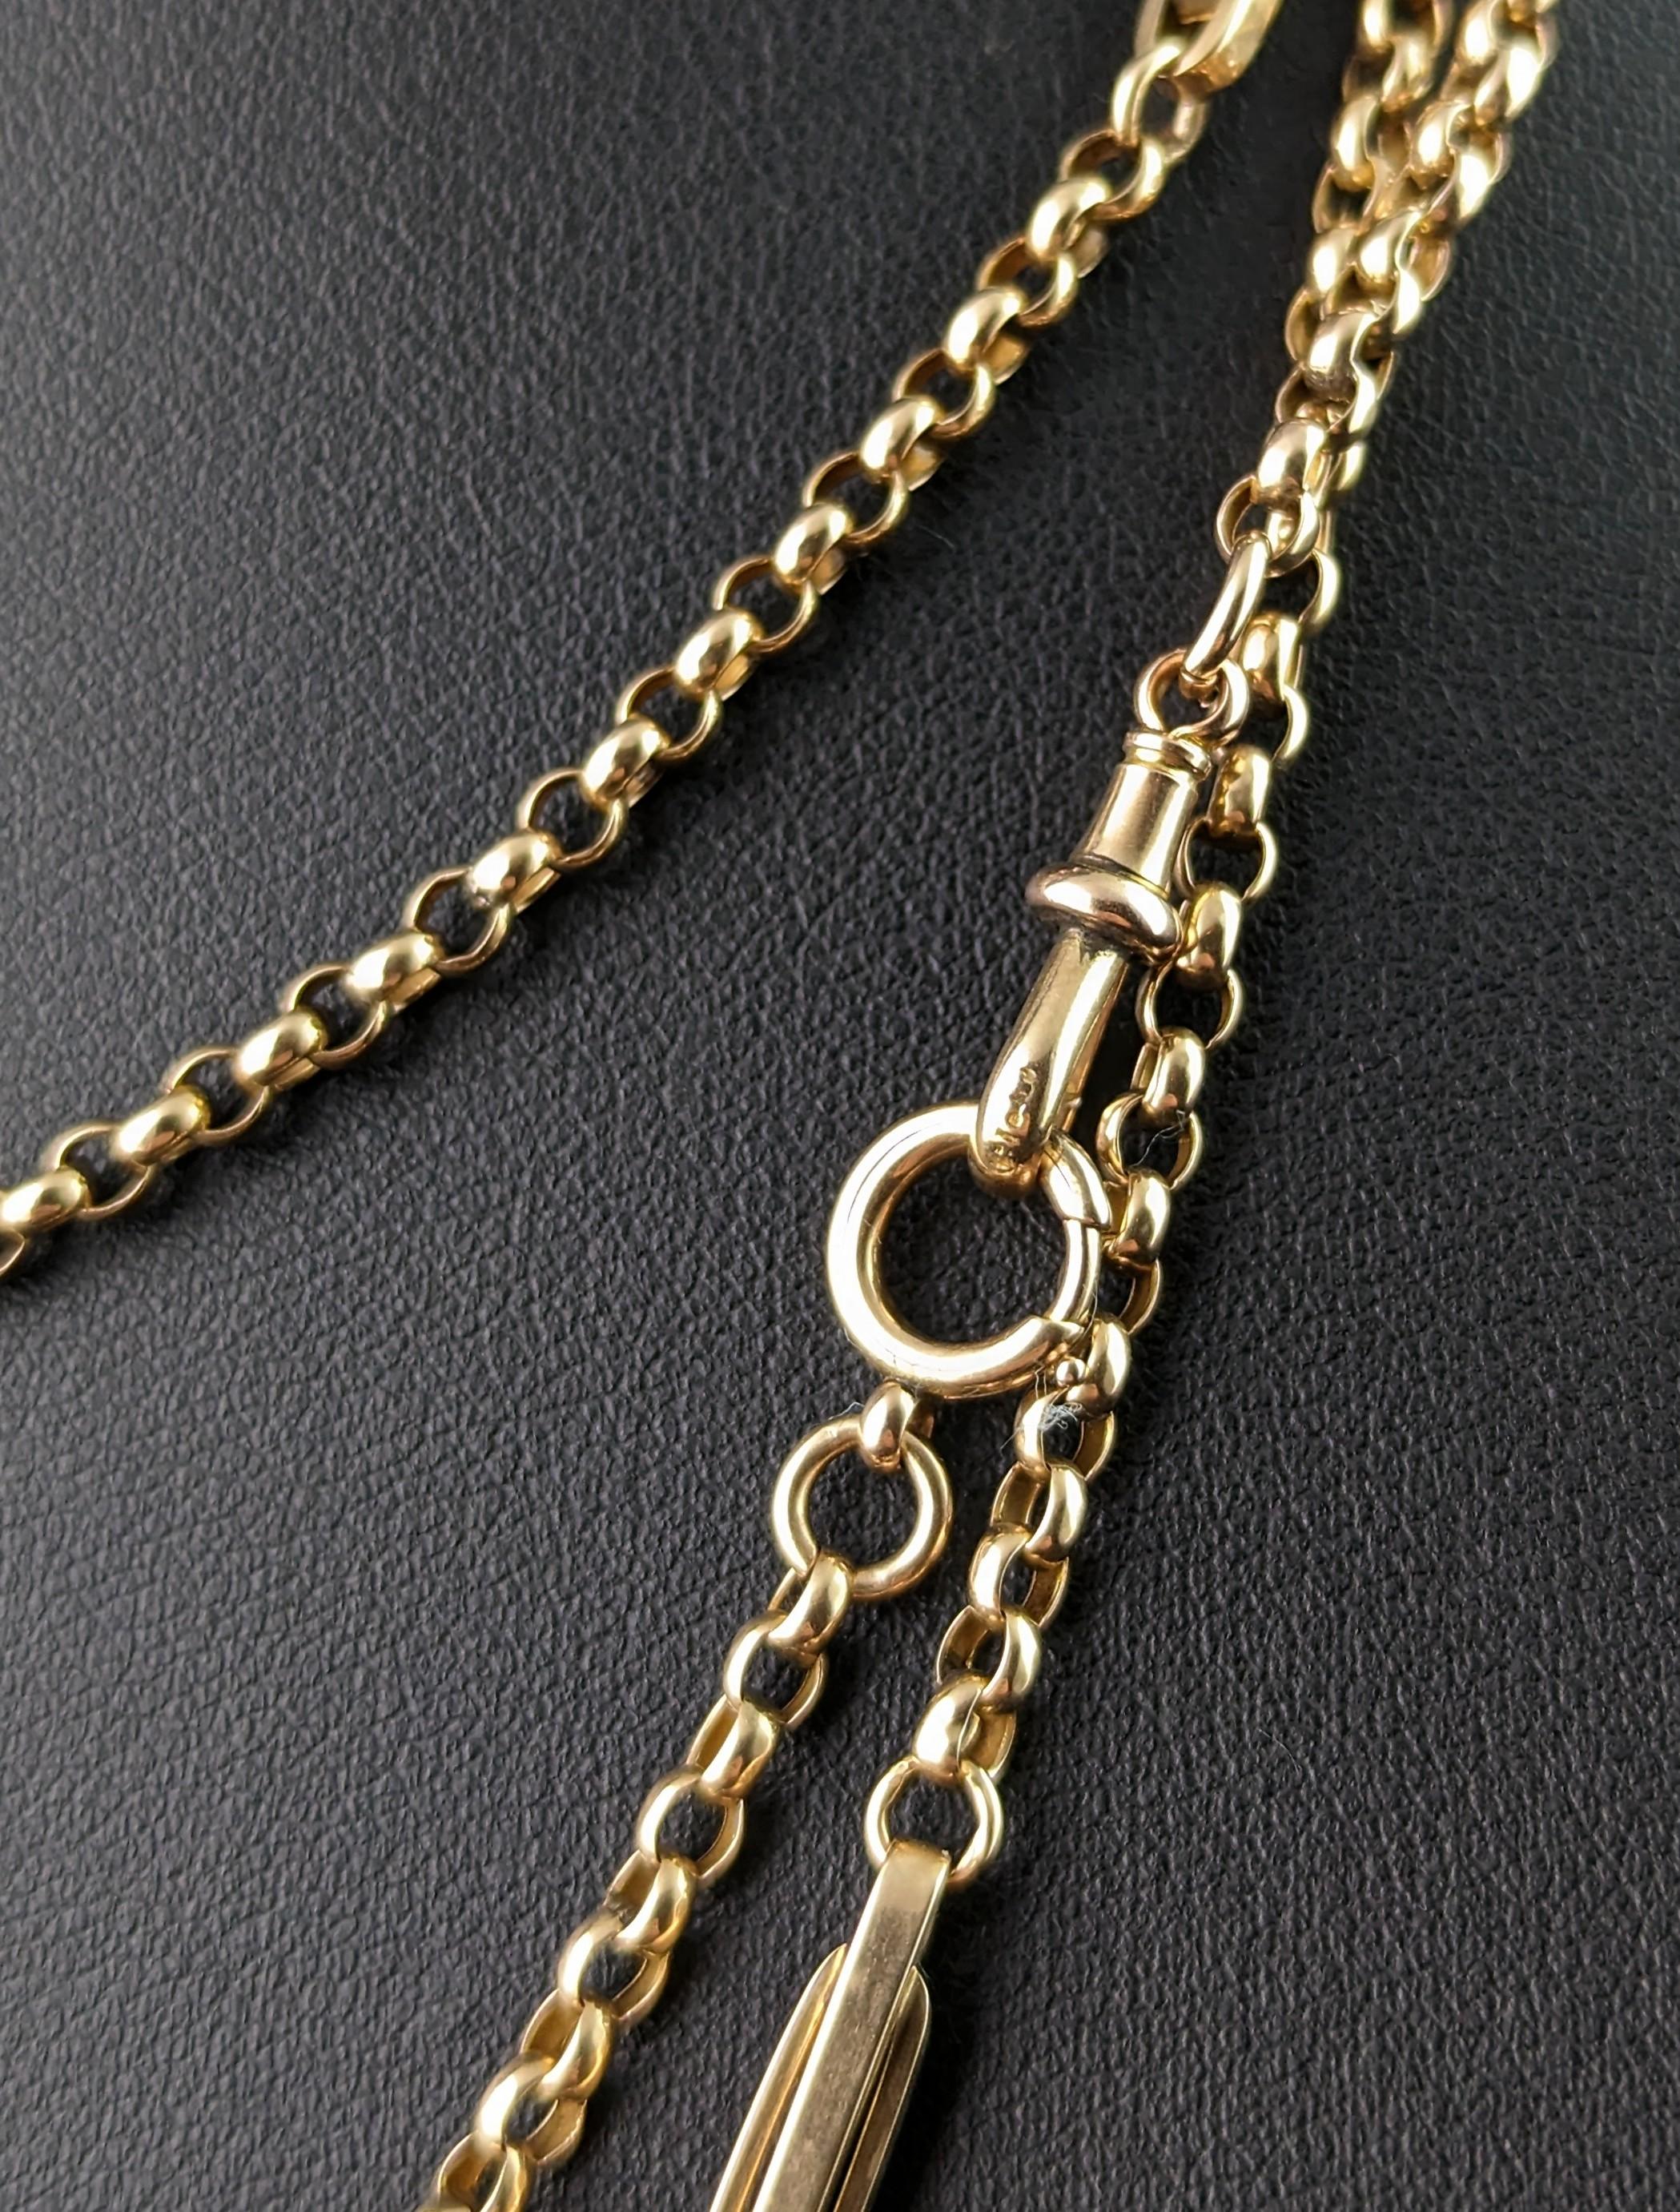 Antique 9 Kt Yellow Gold Fancy Link Long Chain Necklace, Guard Chain, Victorian  For Sale 3